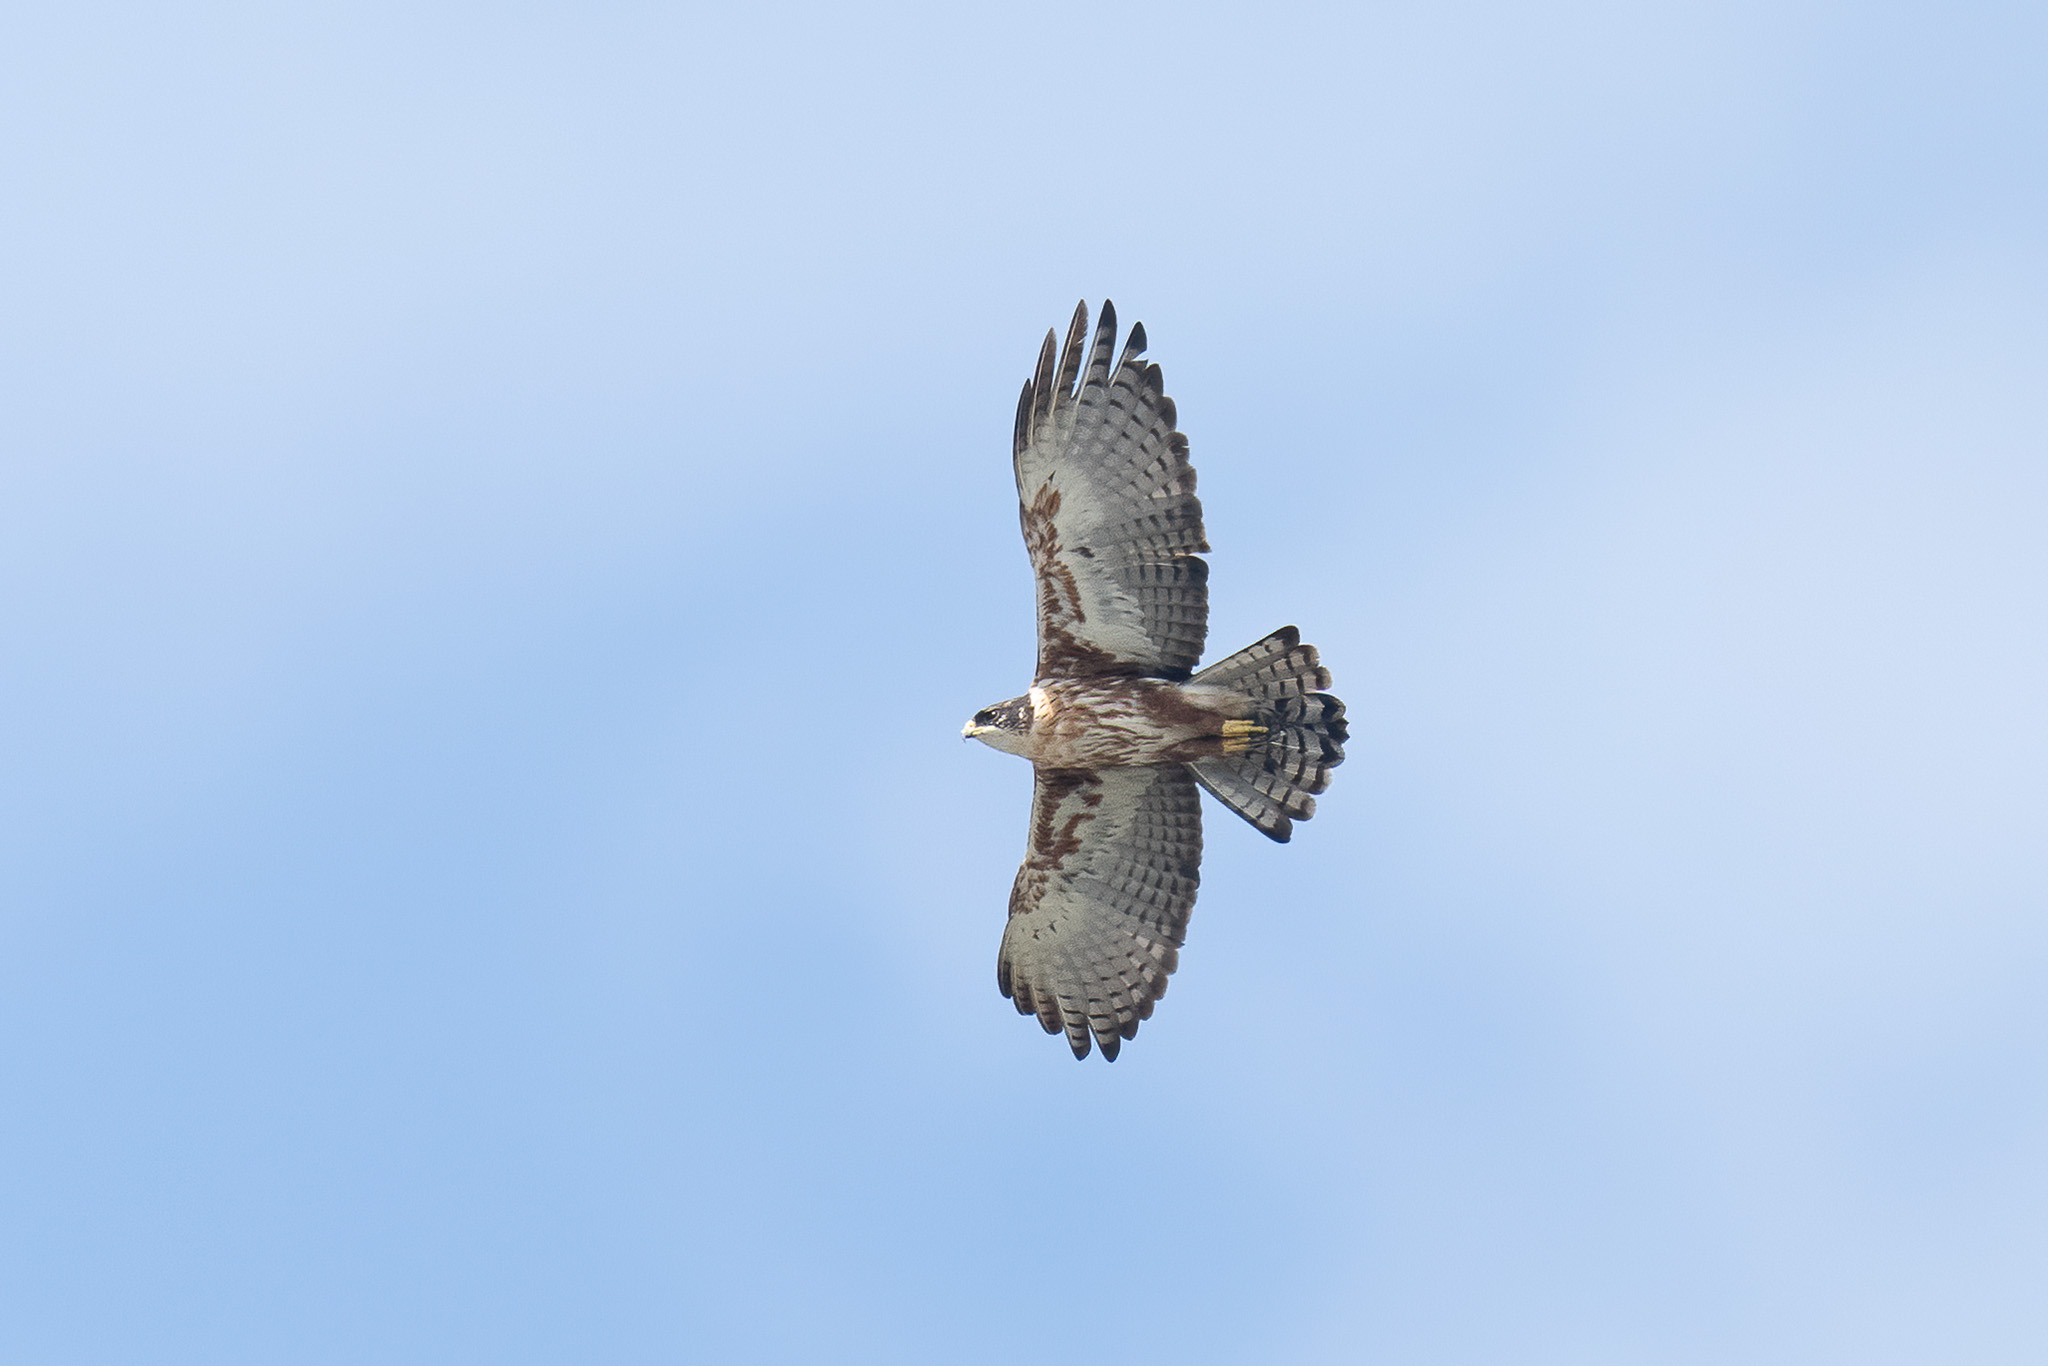 Rufous-bellied Eagle at Bukit Timah Nature Reserve on 23 Sep 2022. Photo credit: Francis Yap